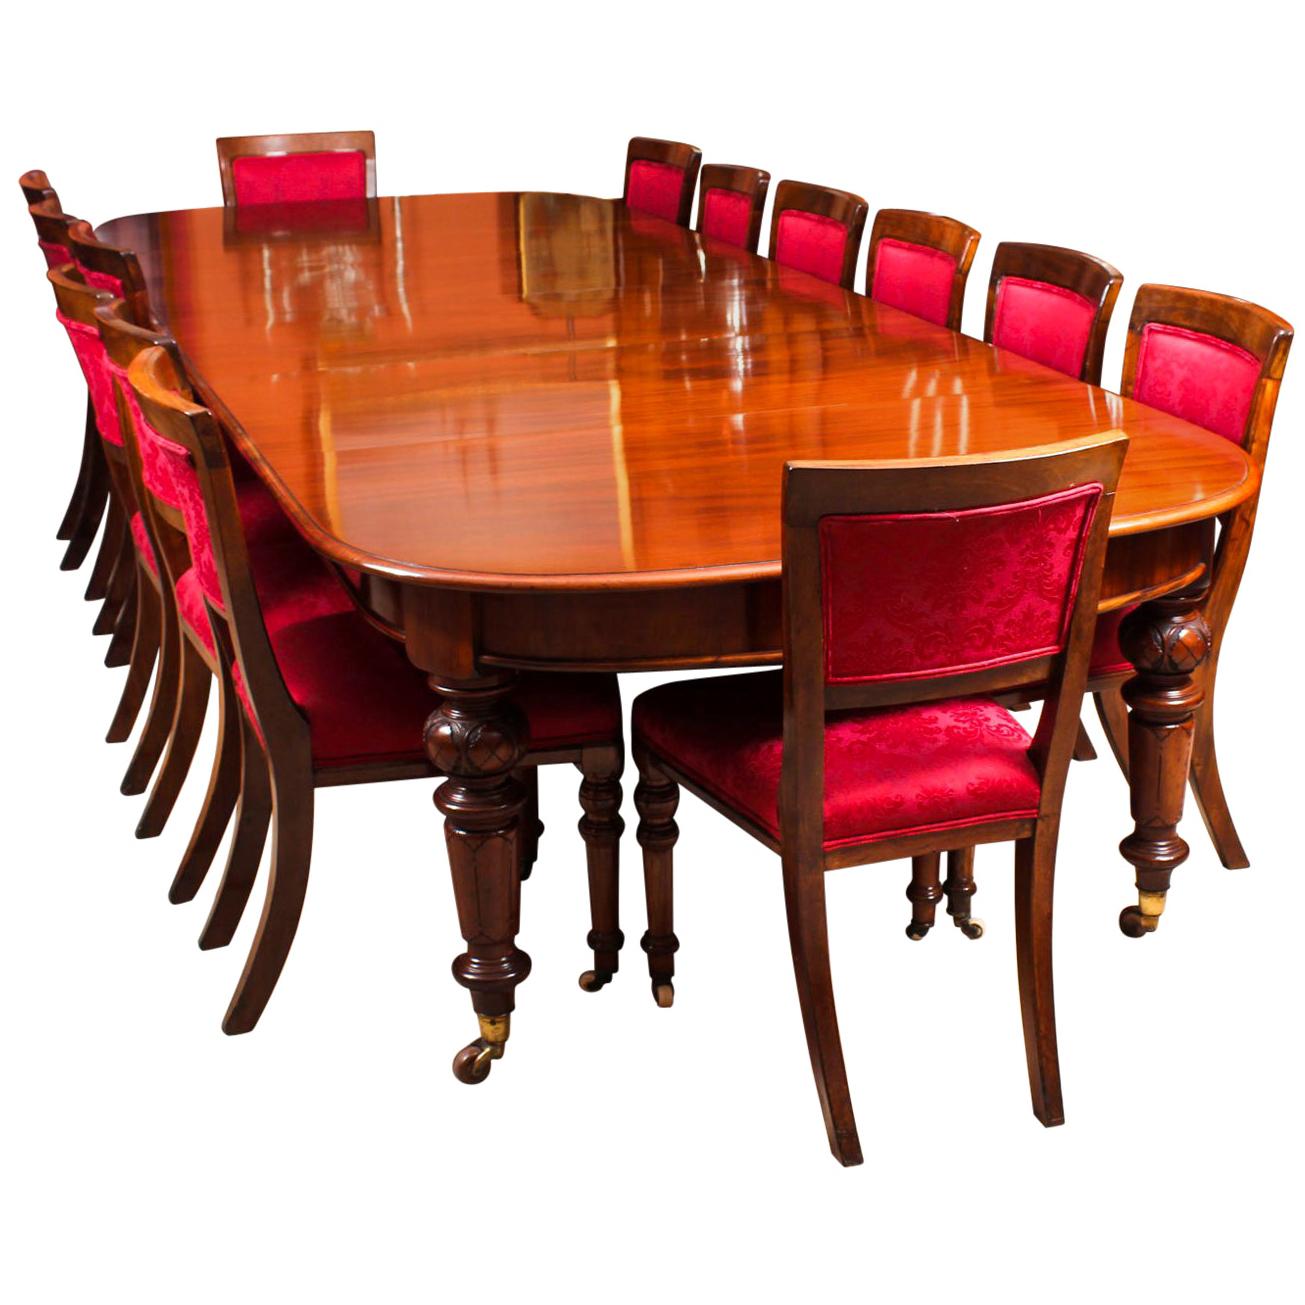 Antique Victorian D-End Mahogany Dining Table and 14 Chairs, 19th Century